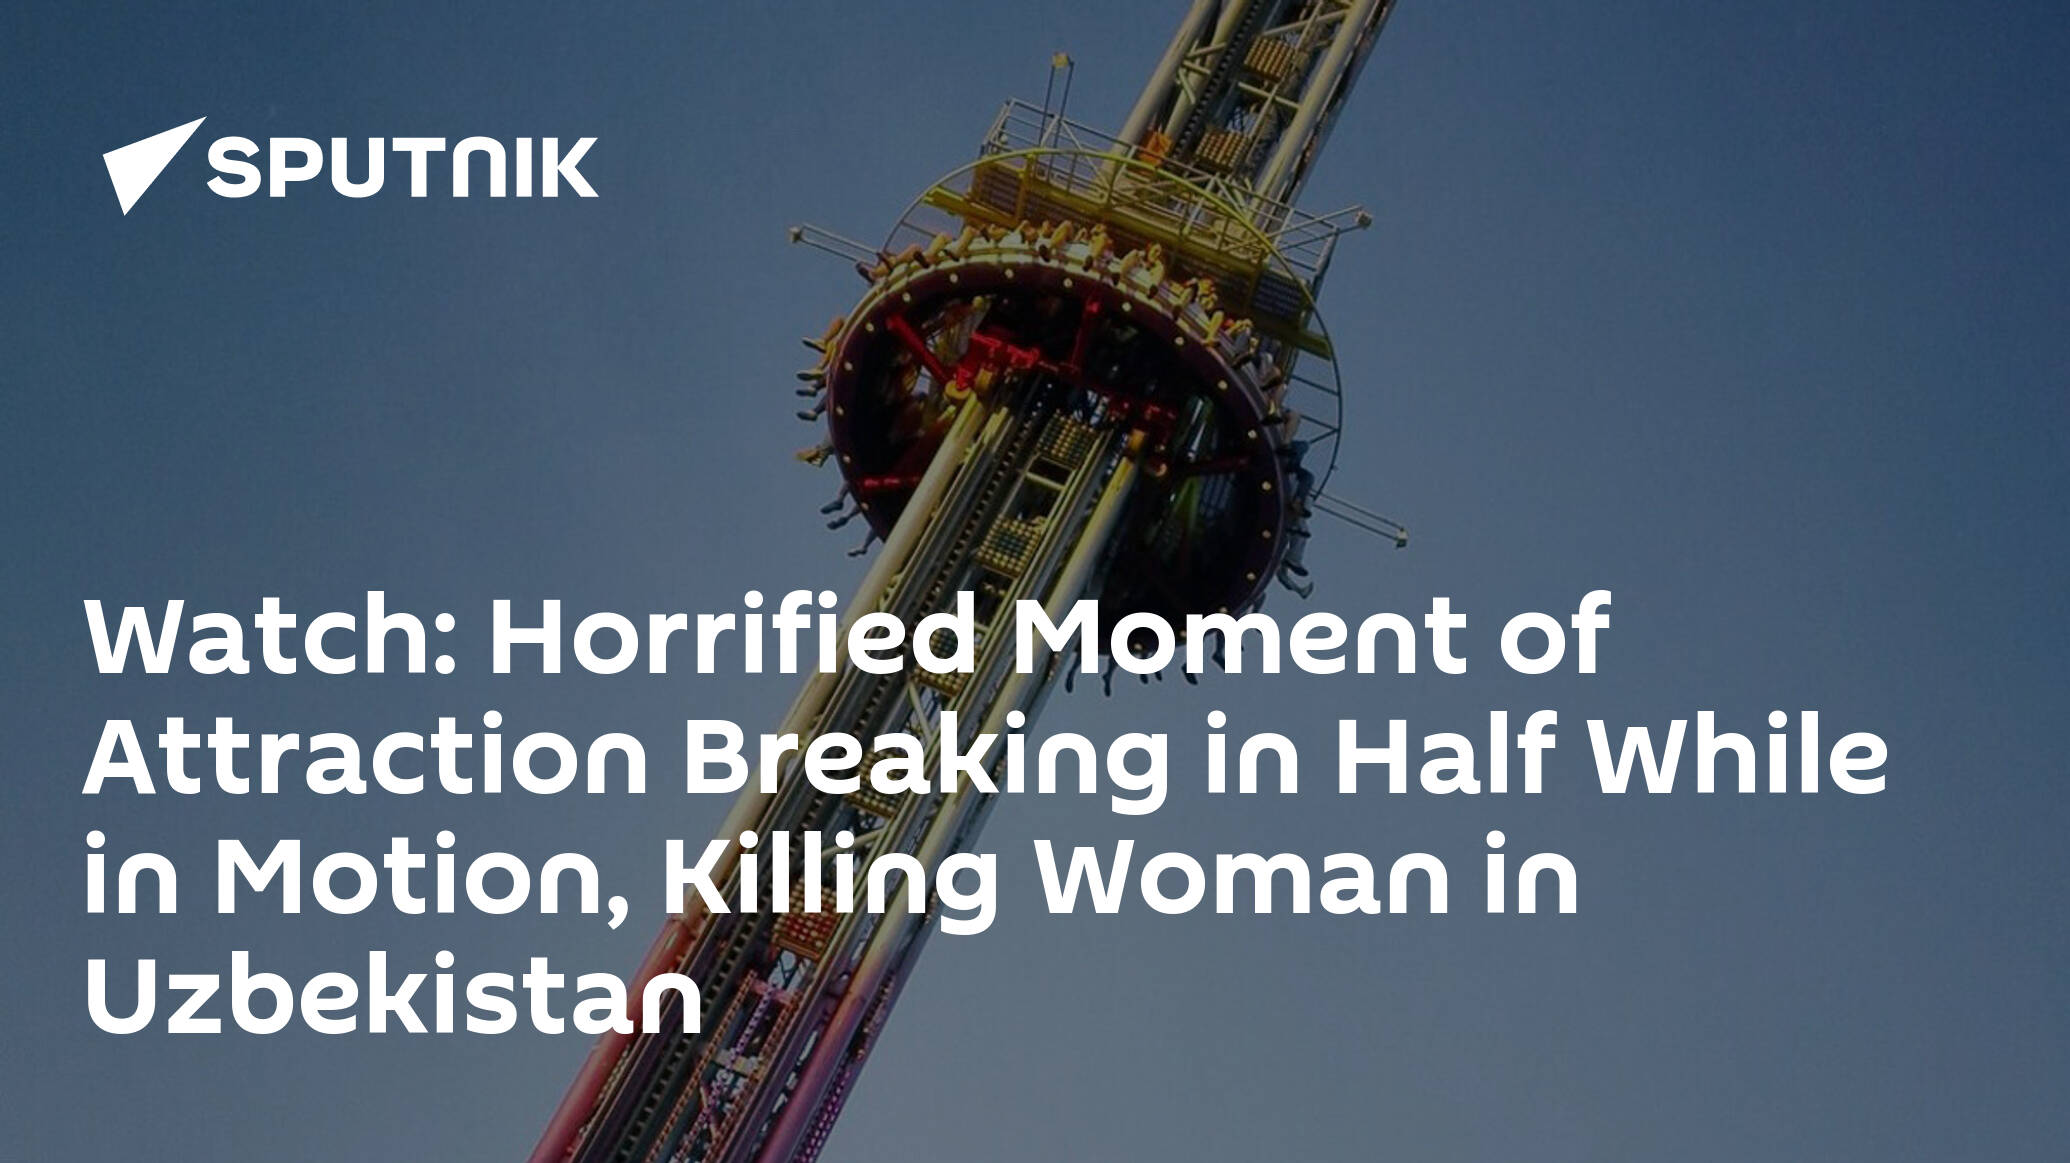 Watch: Horrified Moment of Attraction Breaking in Half While in Motion, Killing Woman in Uzbekistan